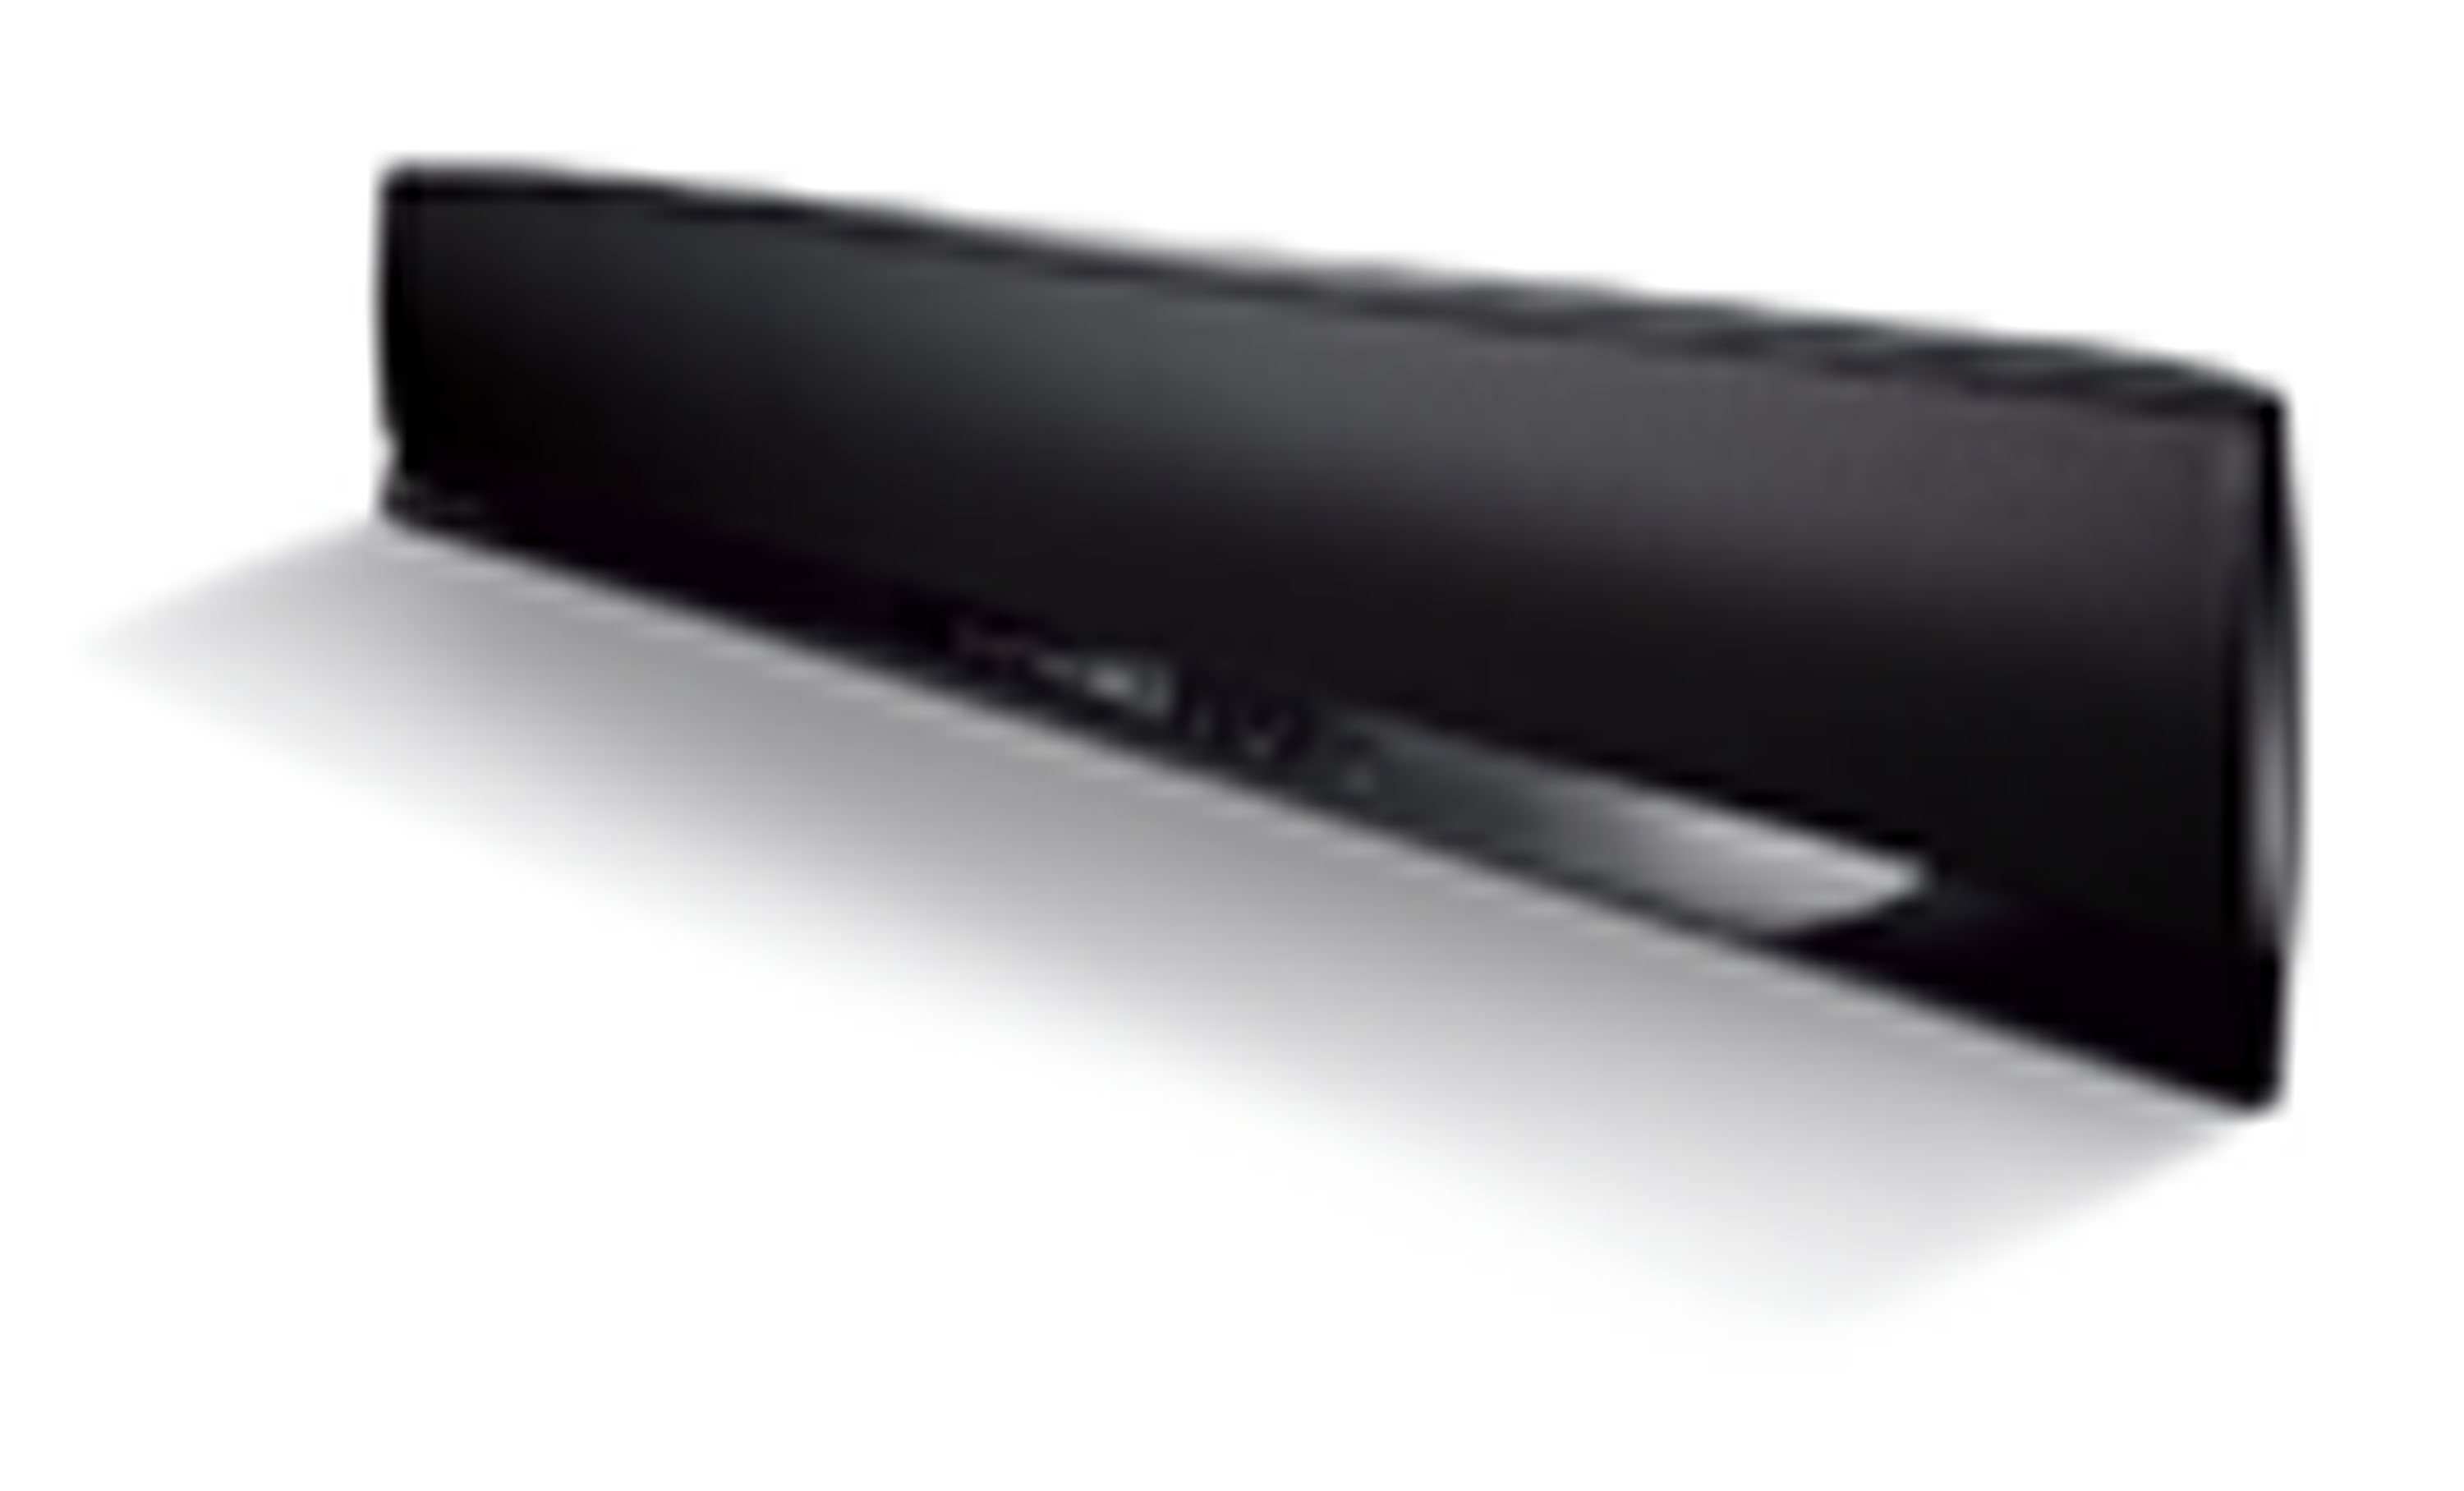 Yamaha unveiled YSP-5100 and YSP-4100 Digital Sound Projectors